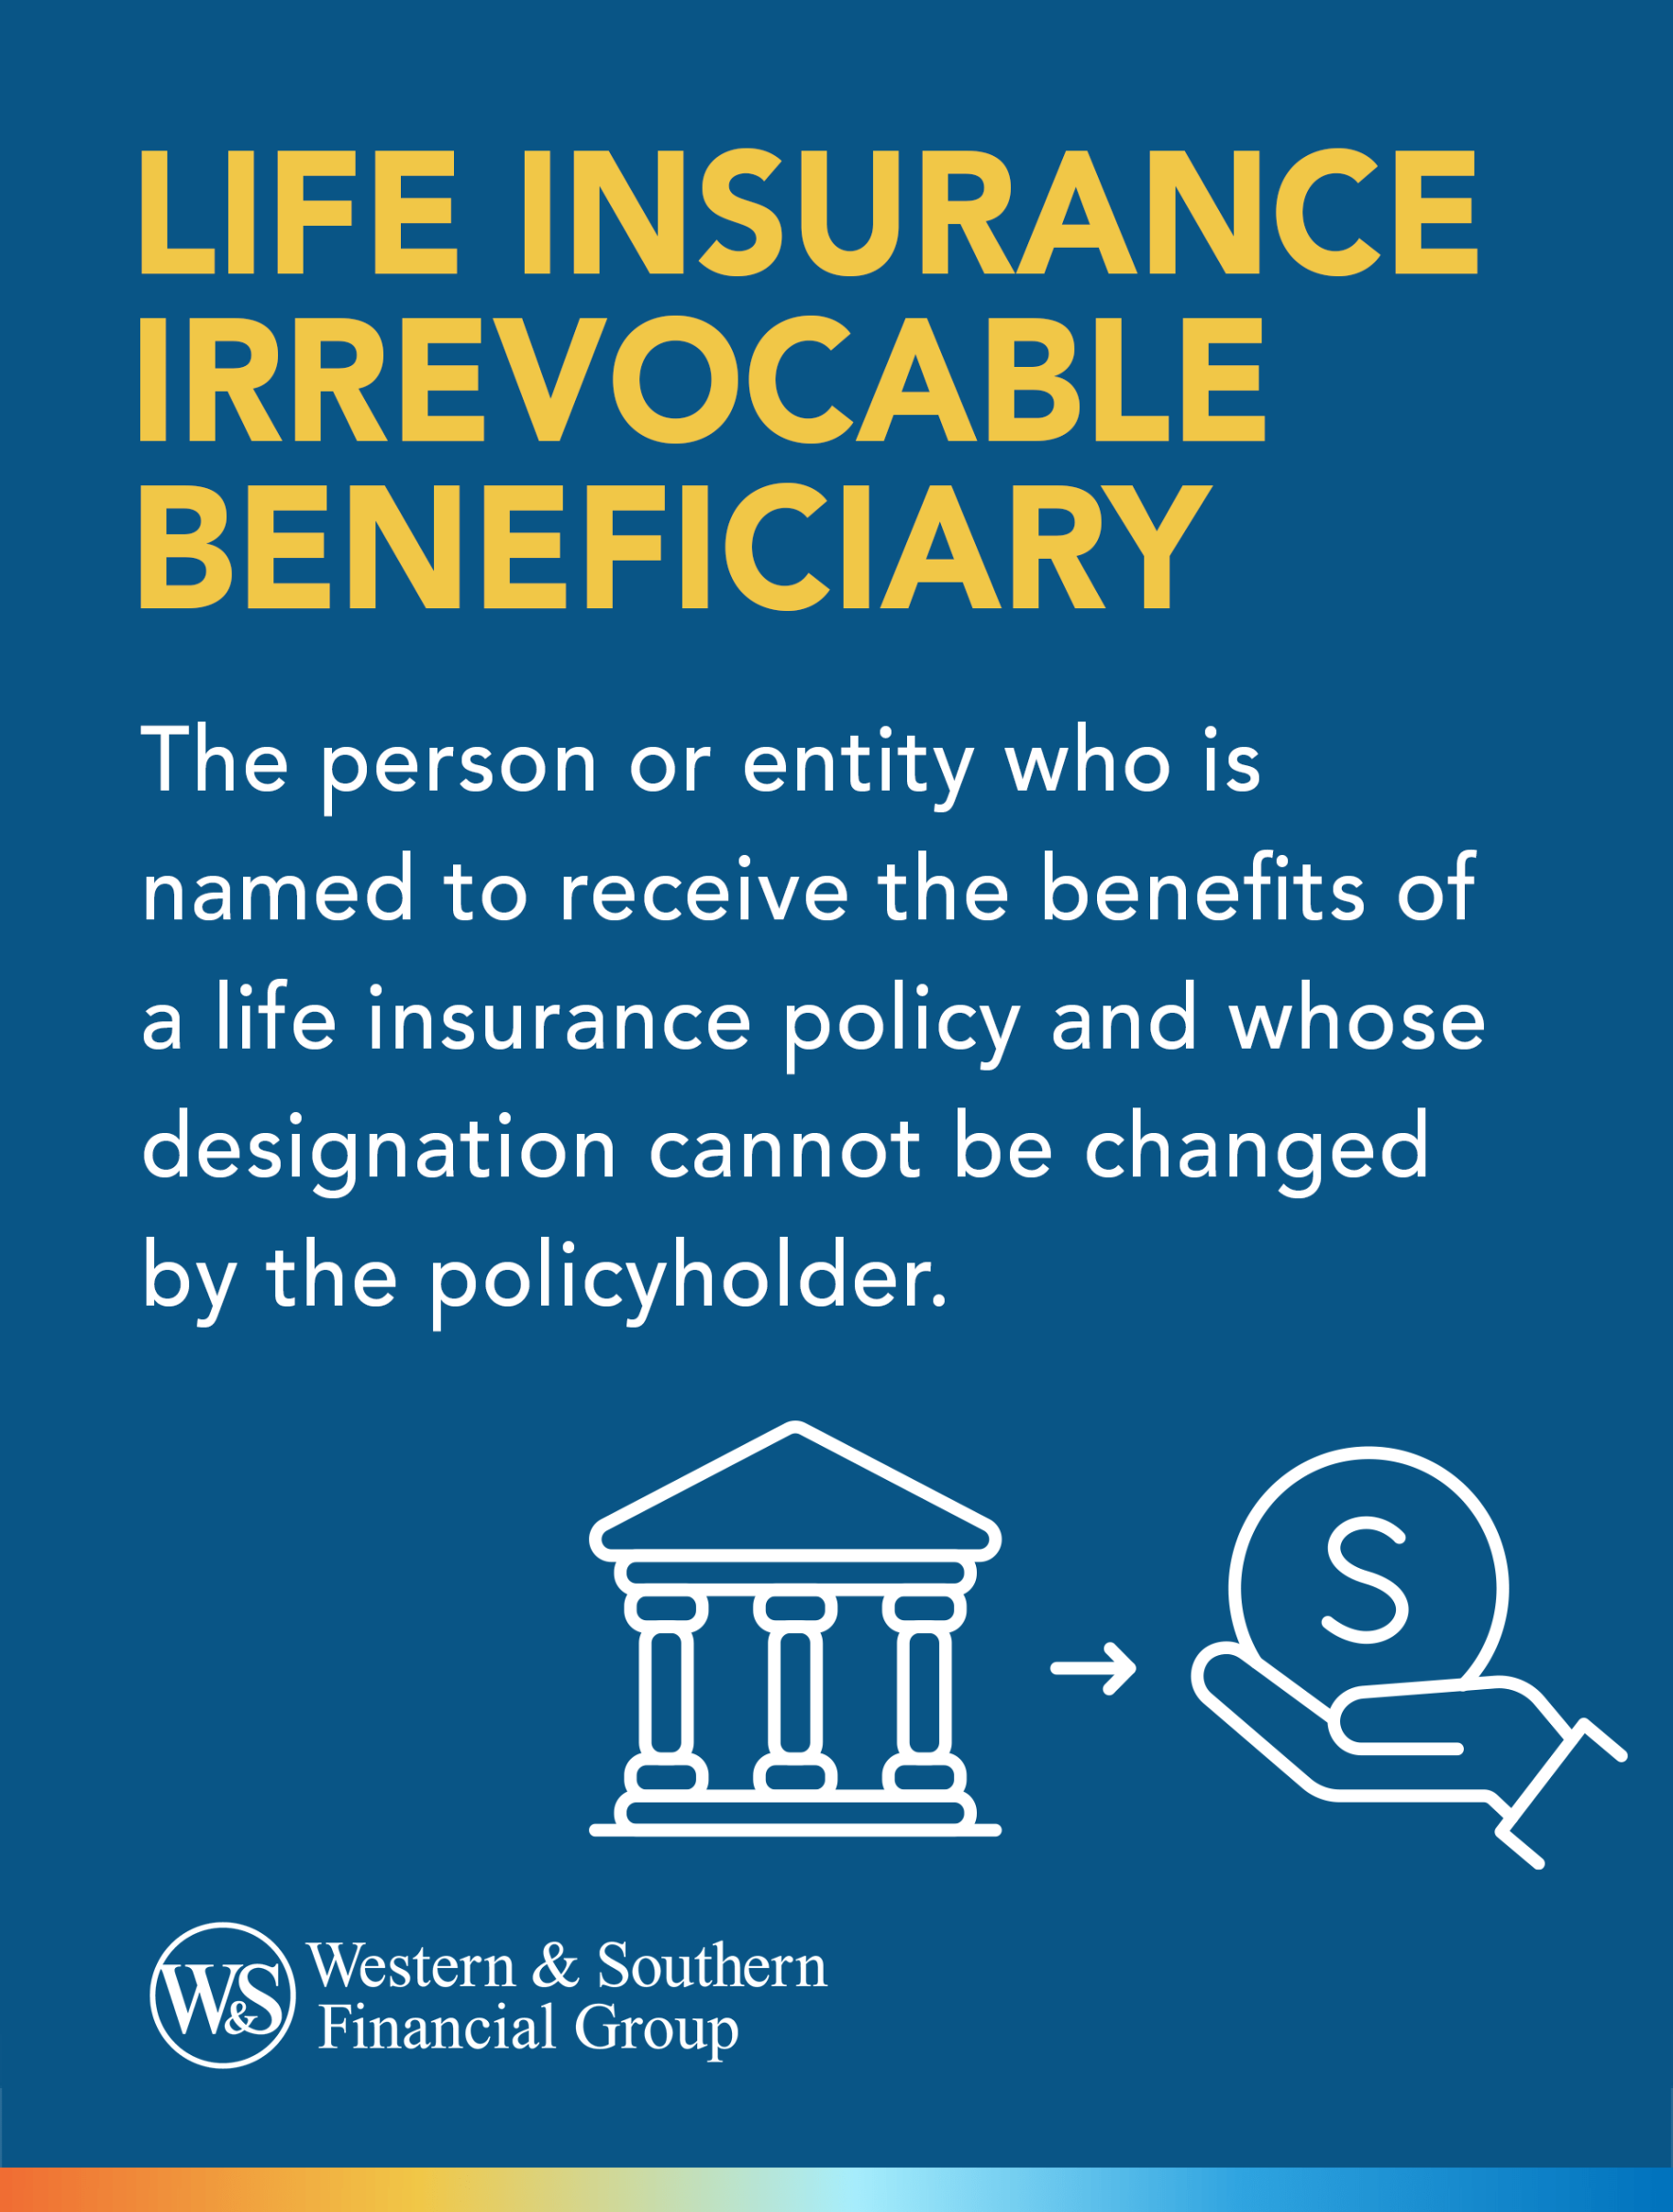 a policyowners rights are limited under which beneficiary designation Bulan 2 What Is an Irrevocable Beneficiary?